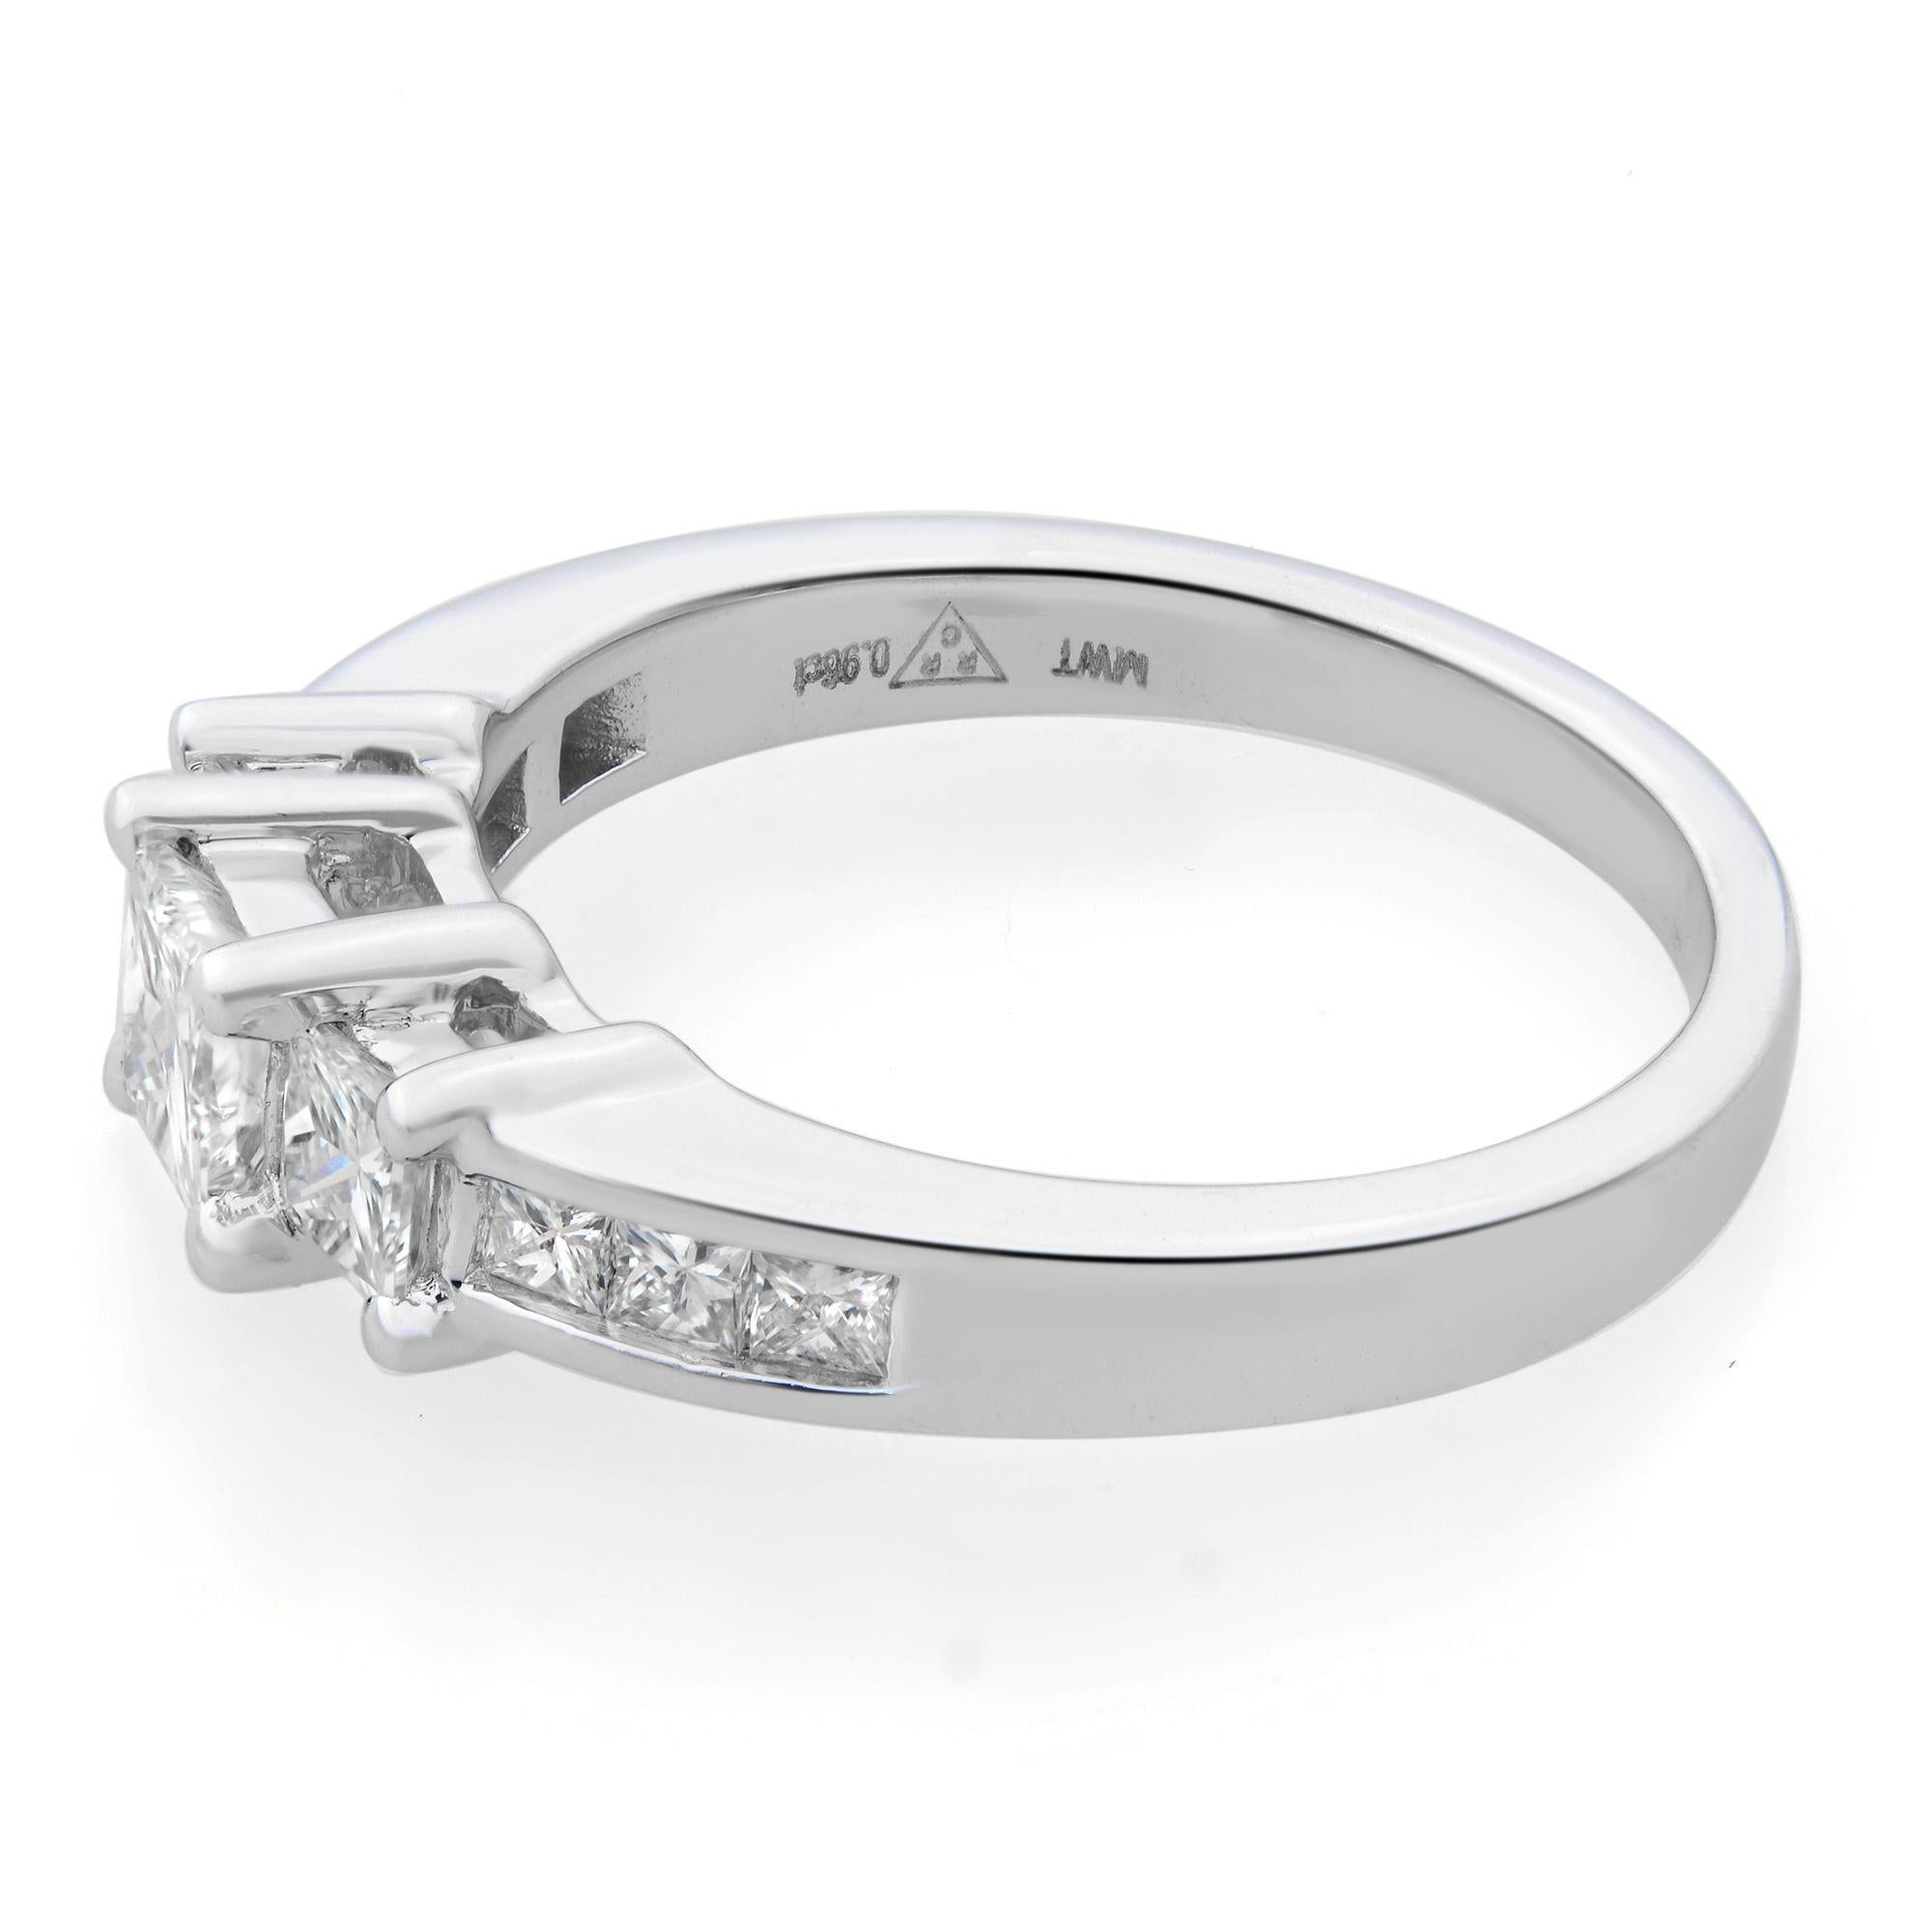 Our three-stone engagement ring features a 0.50 carat princess cut diamond center stone which is accented by two princess cut diamond side stones. More princess cut diamonds are channel set along the shank. This 14K white gold engagement ring has a